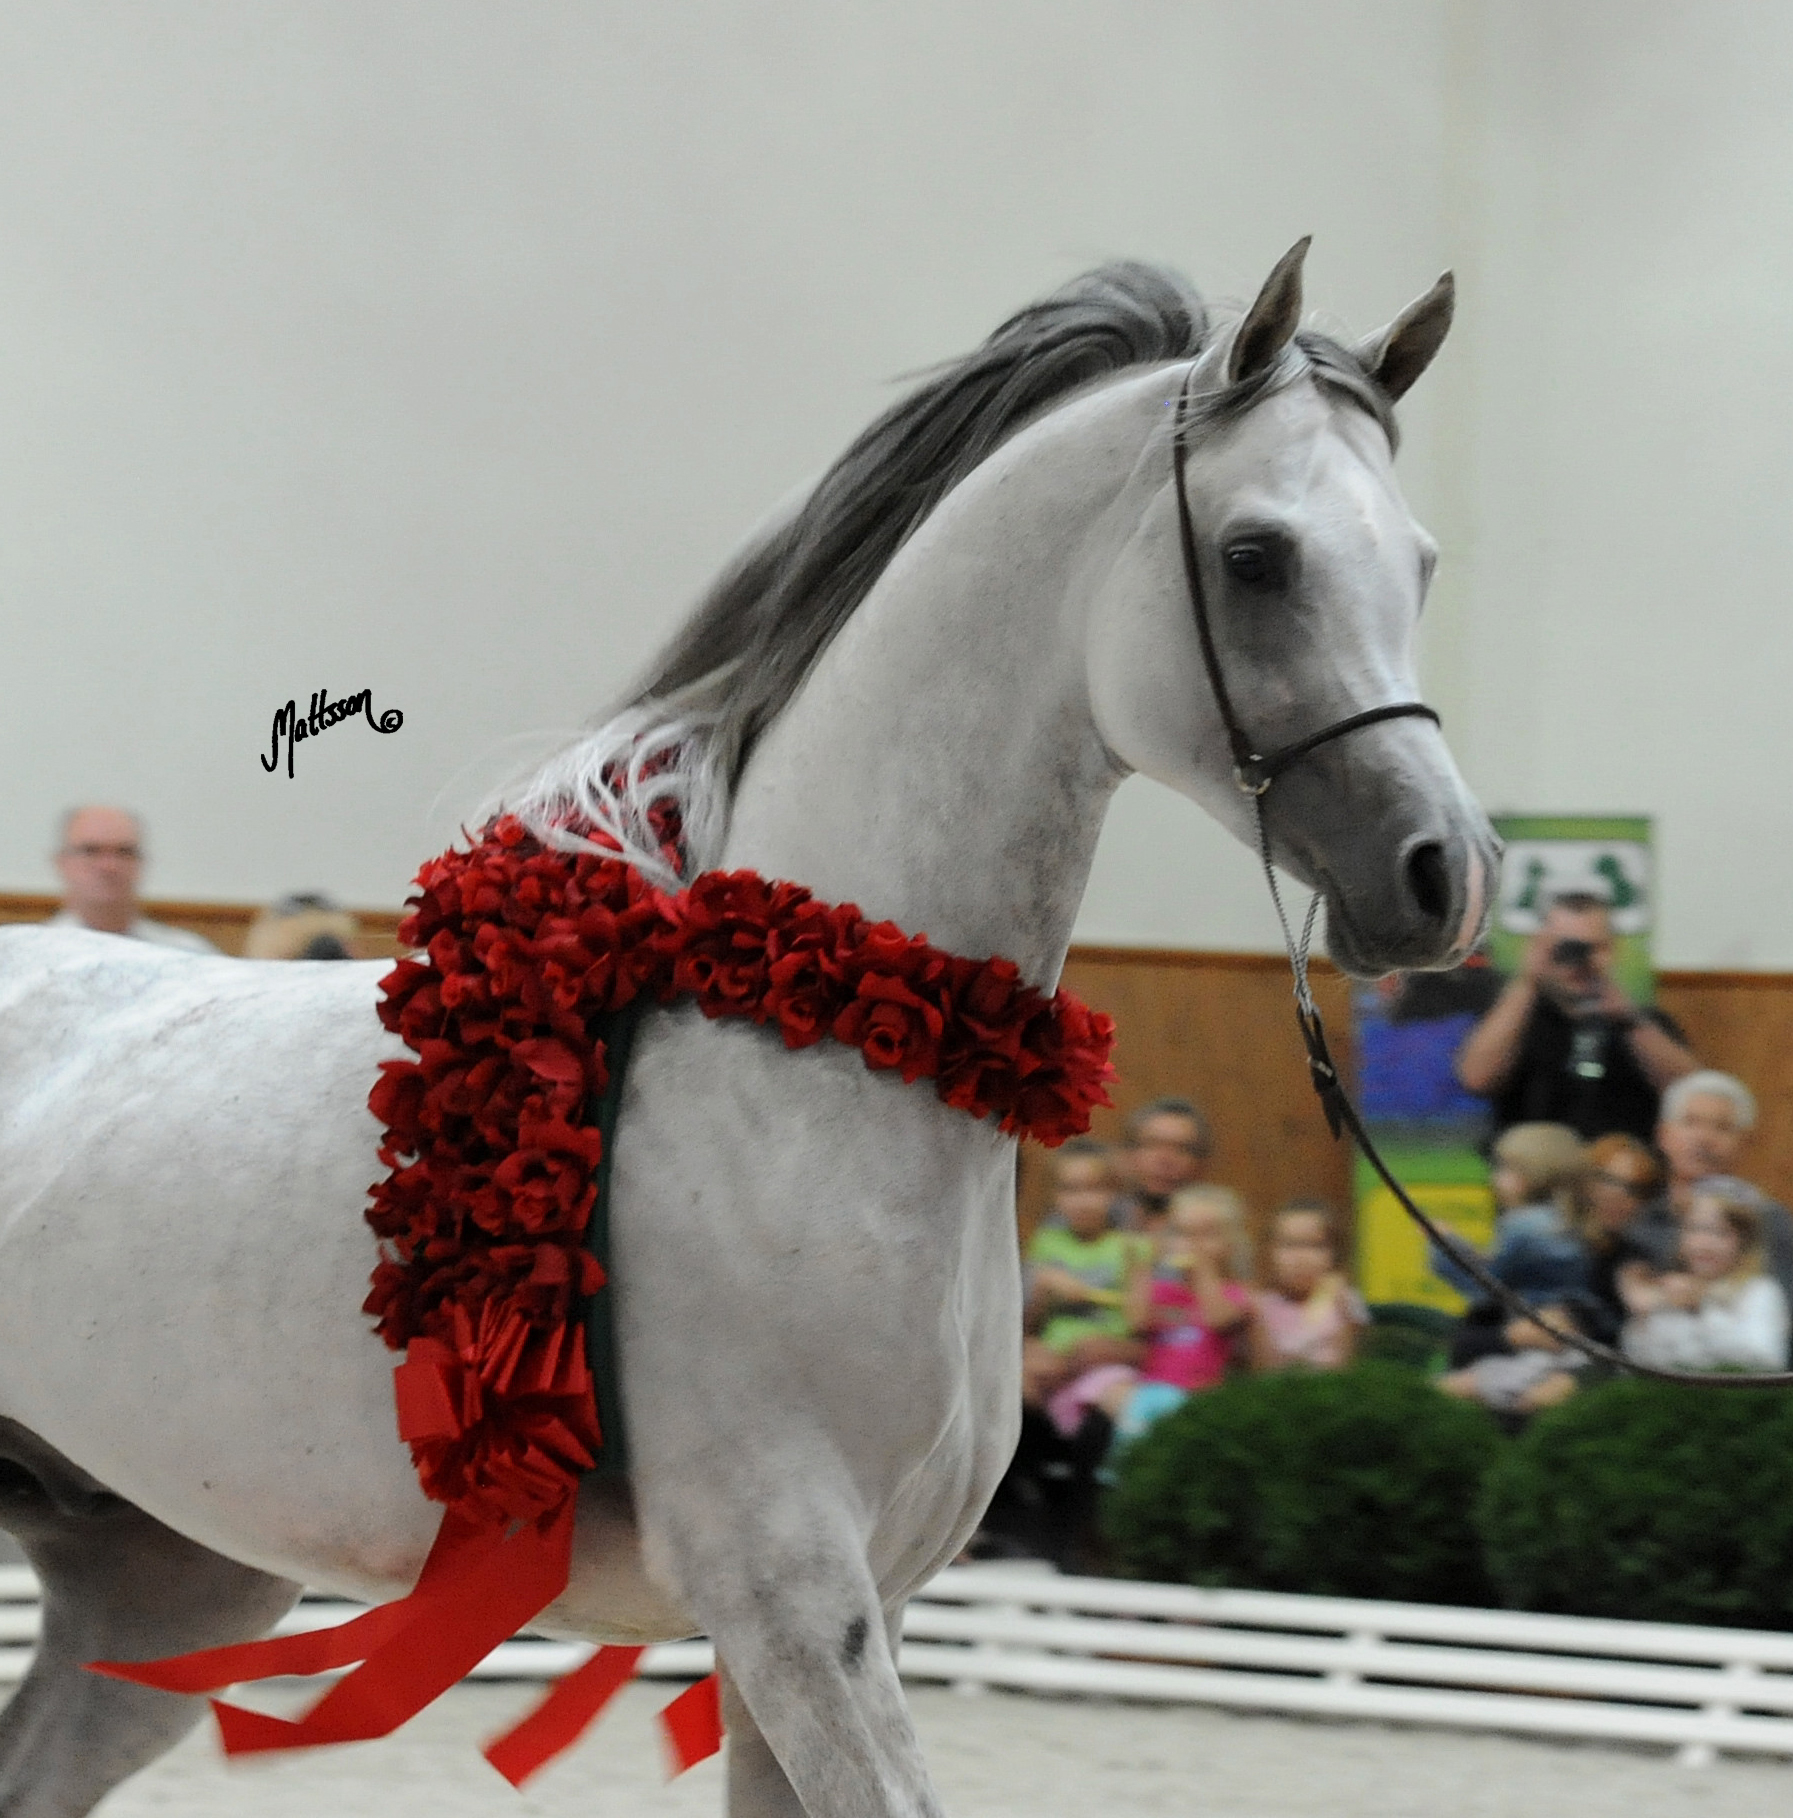 Kabsztad at the Michalow Breeding Parade in August 2011